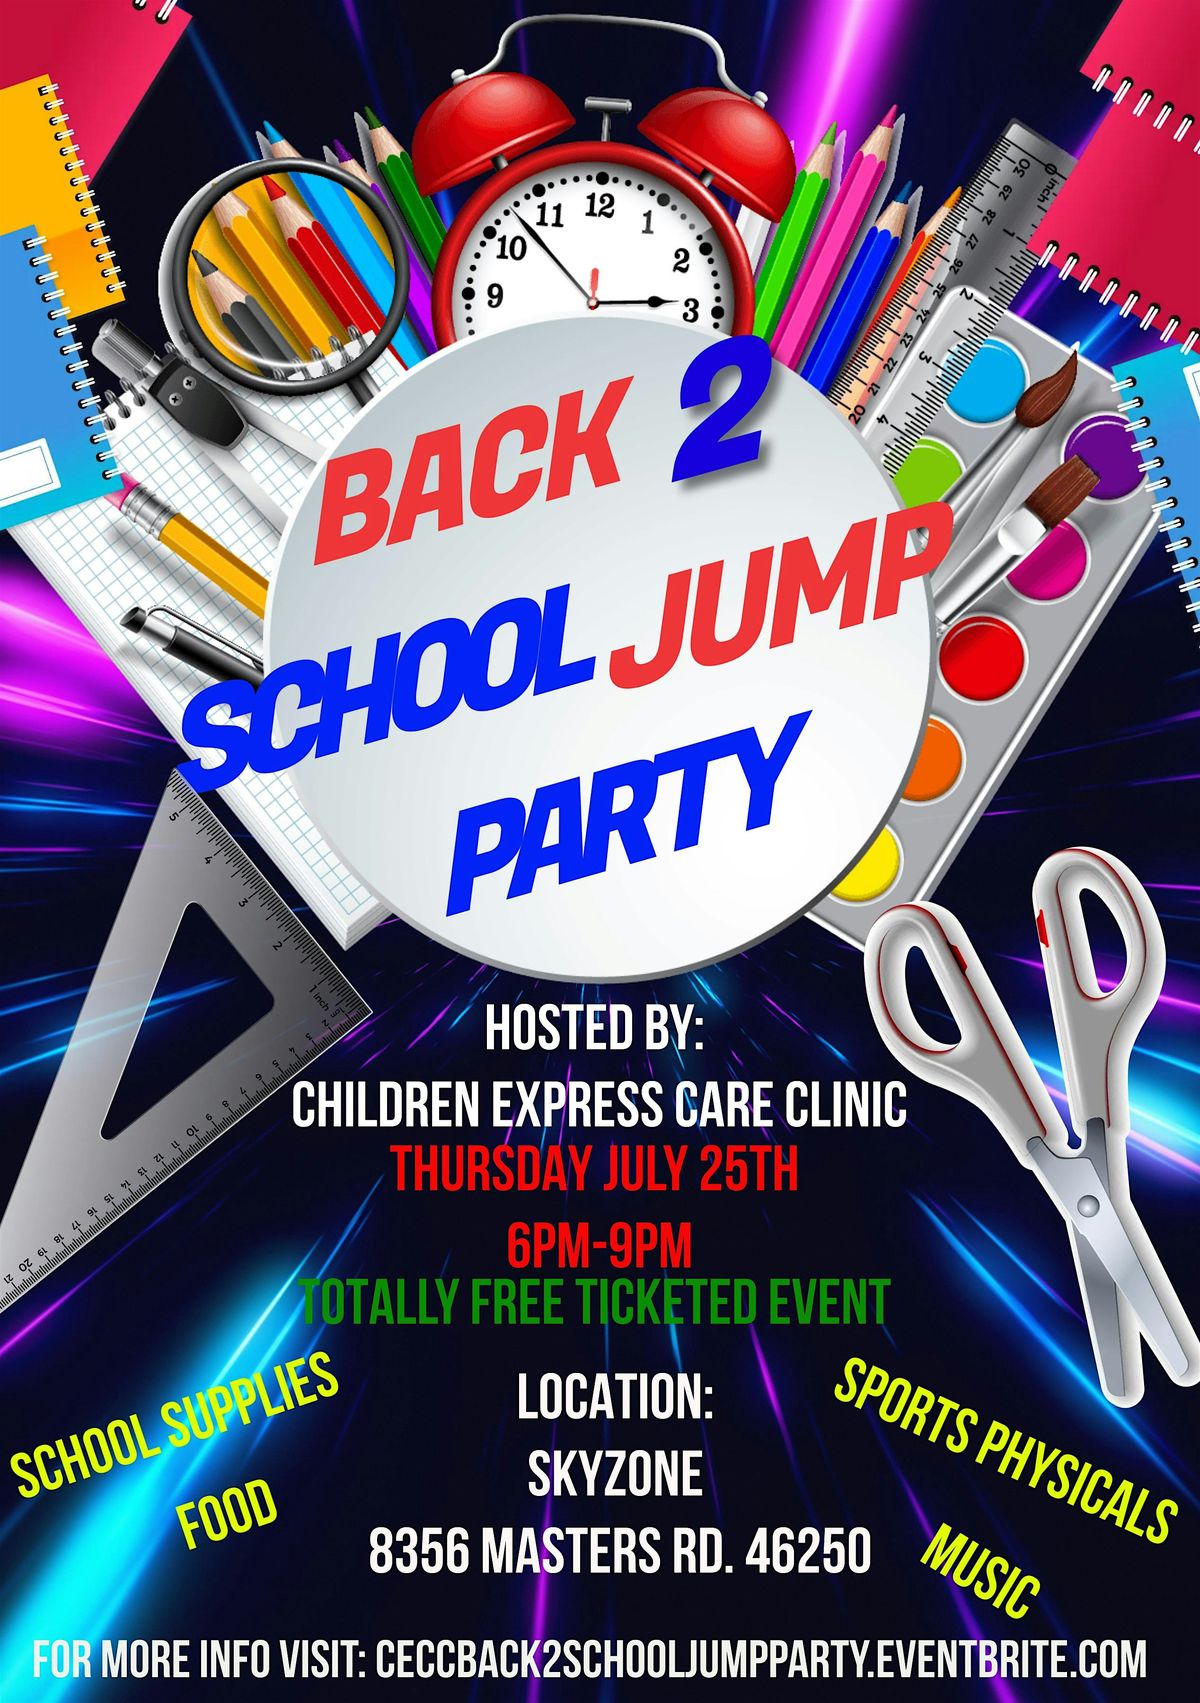 Children Express Care Clinic Back 2 School Jump Party